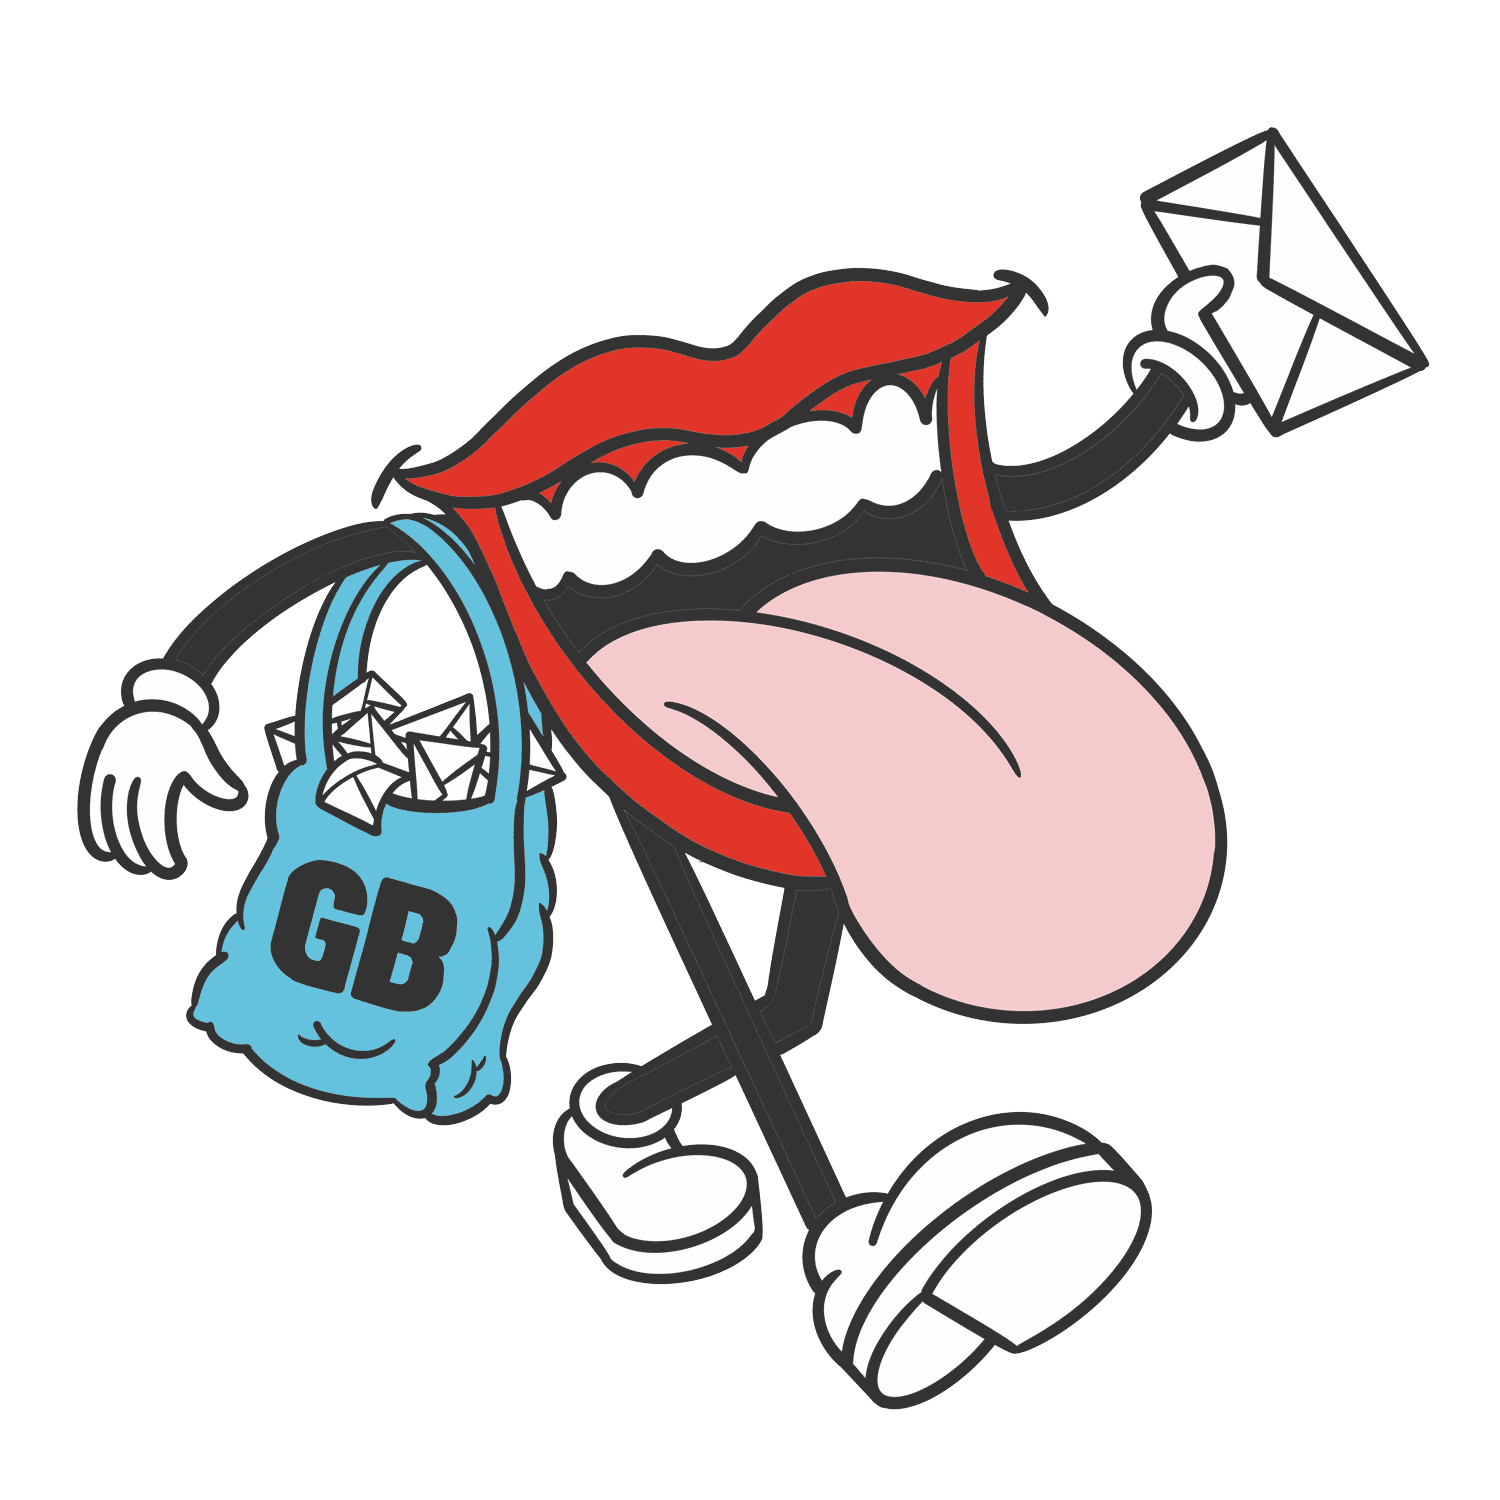 Image of an open mouth with its tongue out, carrying a mail bag, and delivering letters from Goldbelly